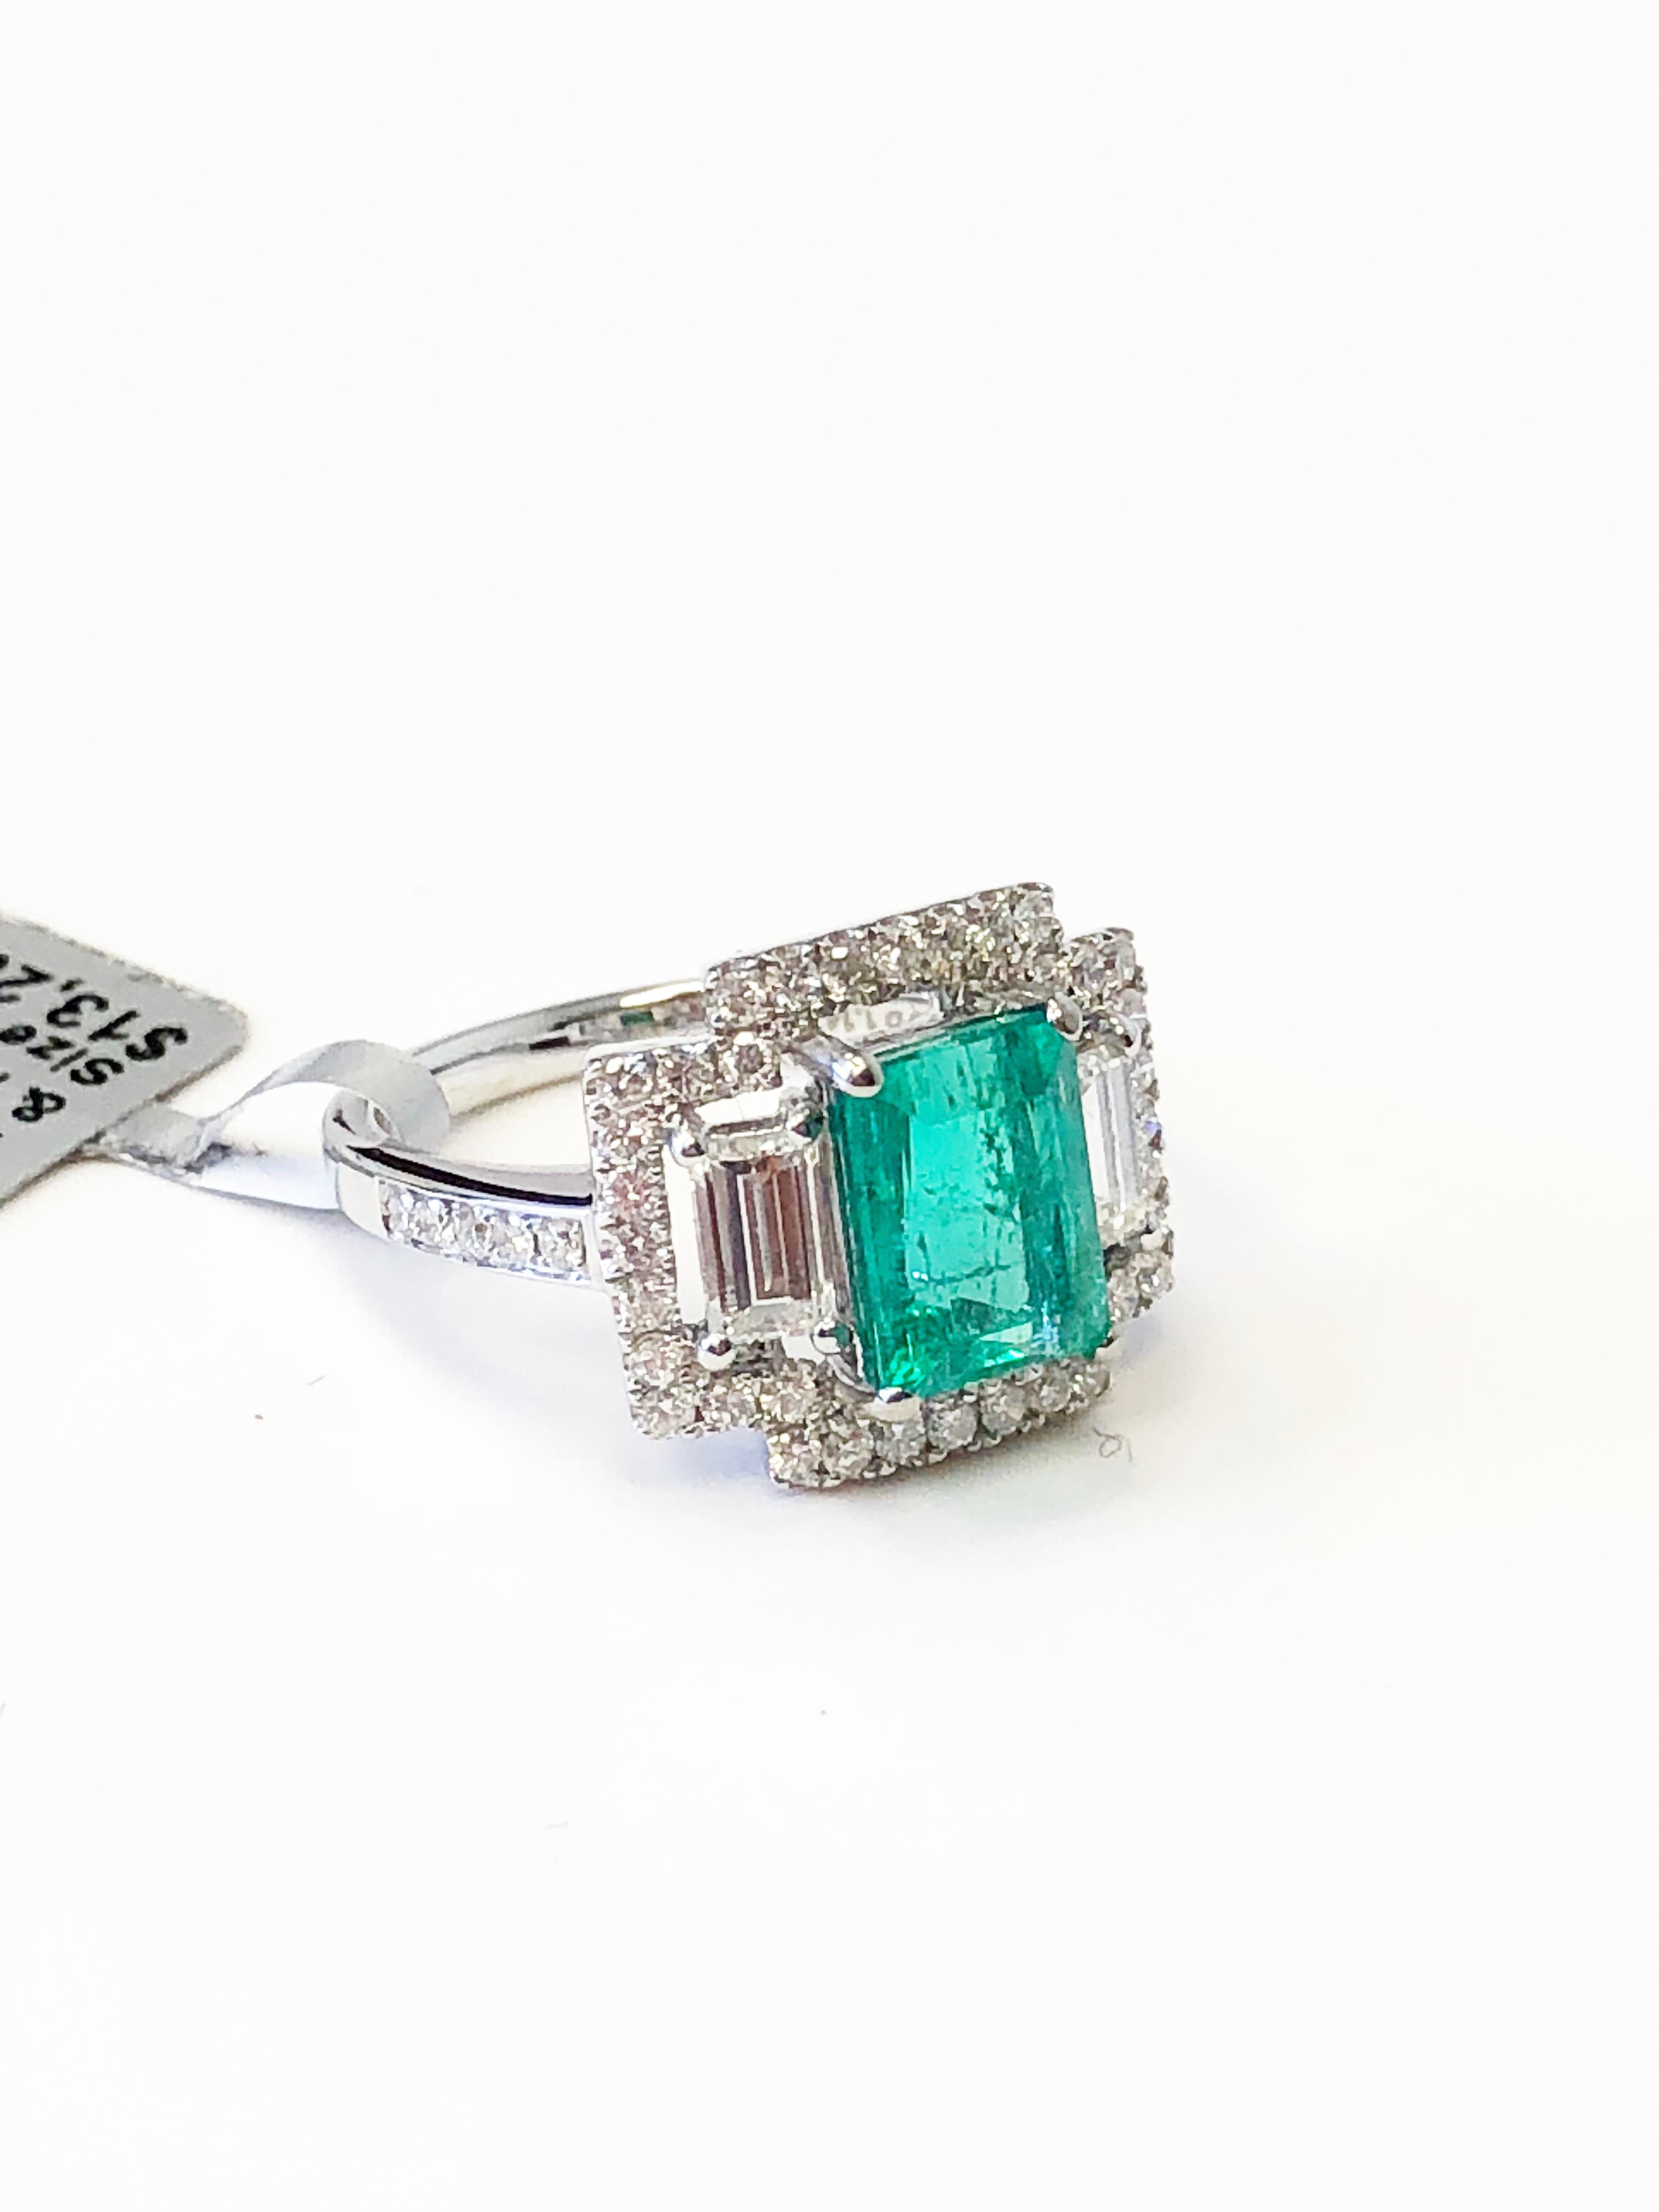 Bright emerald emerald cut weighing 2.05 carats surrounded by 1.14 carats of emerald cut and round diamonds in a handcrafted 18k white gold mounting.  Ring size is 6.  Beautiful addition to any jewelry collection.  Can be worn as a cocktail ring or